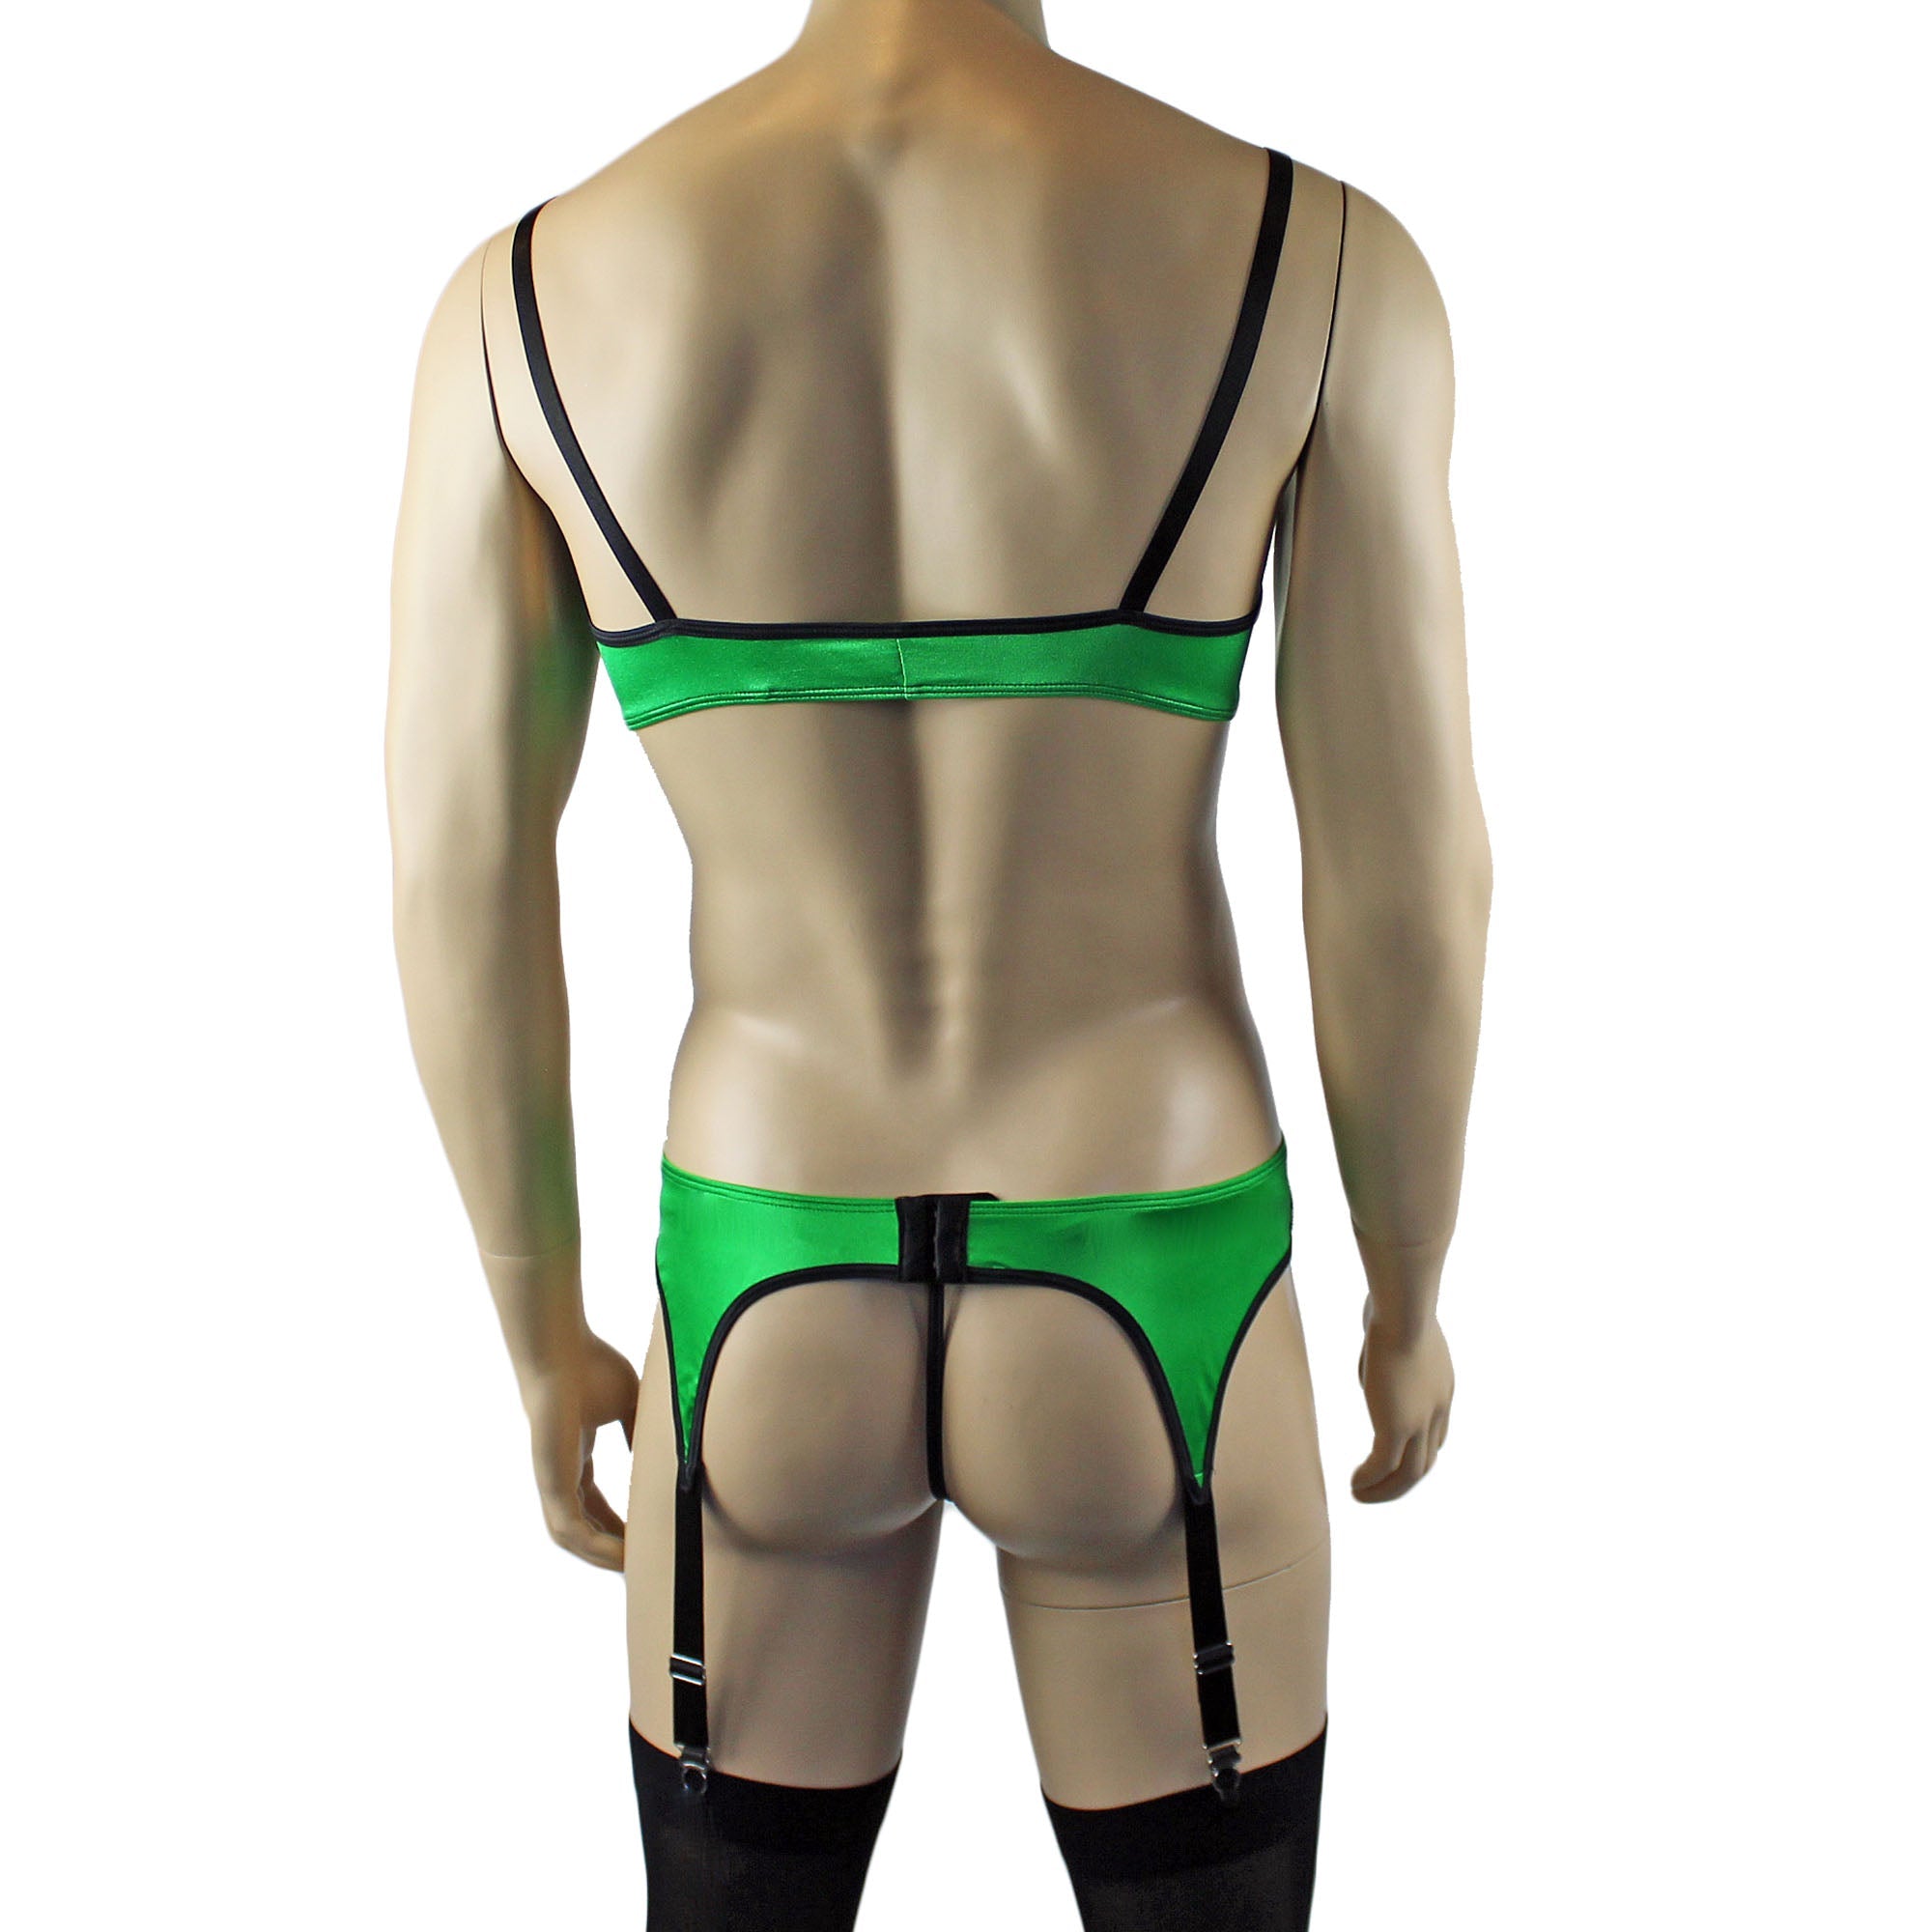 Mens Risque Bra Top, G string and Garterbelt Green and Black Lace